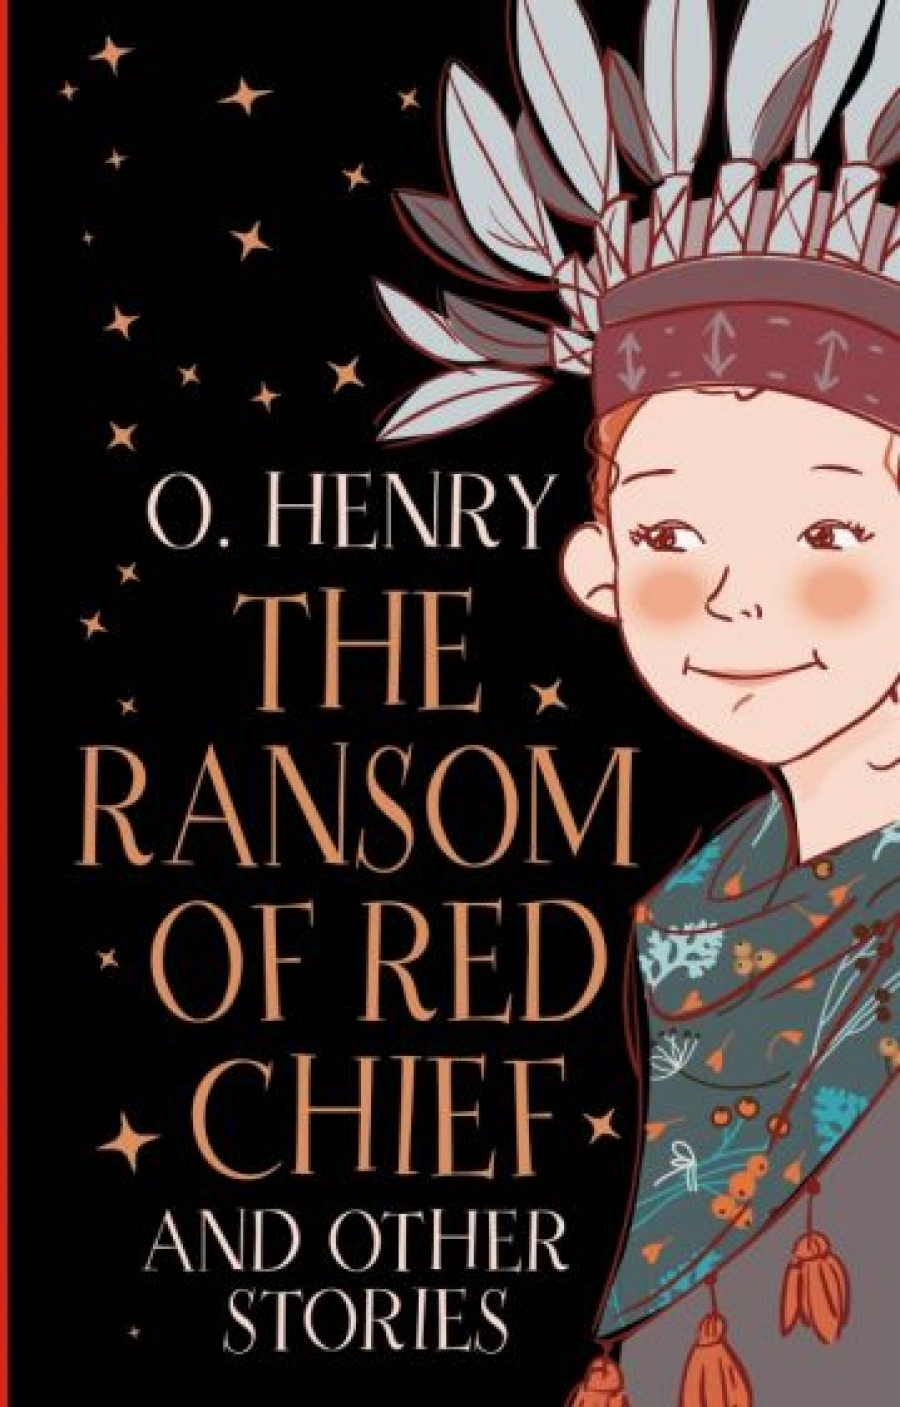 O. Henry The Ransom of Red Chief and other stories 